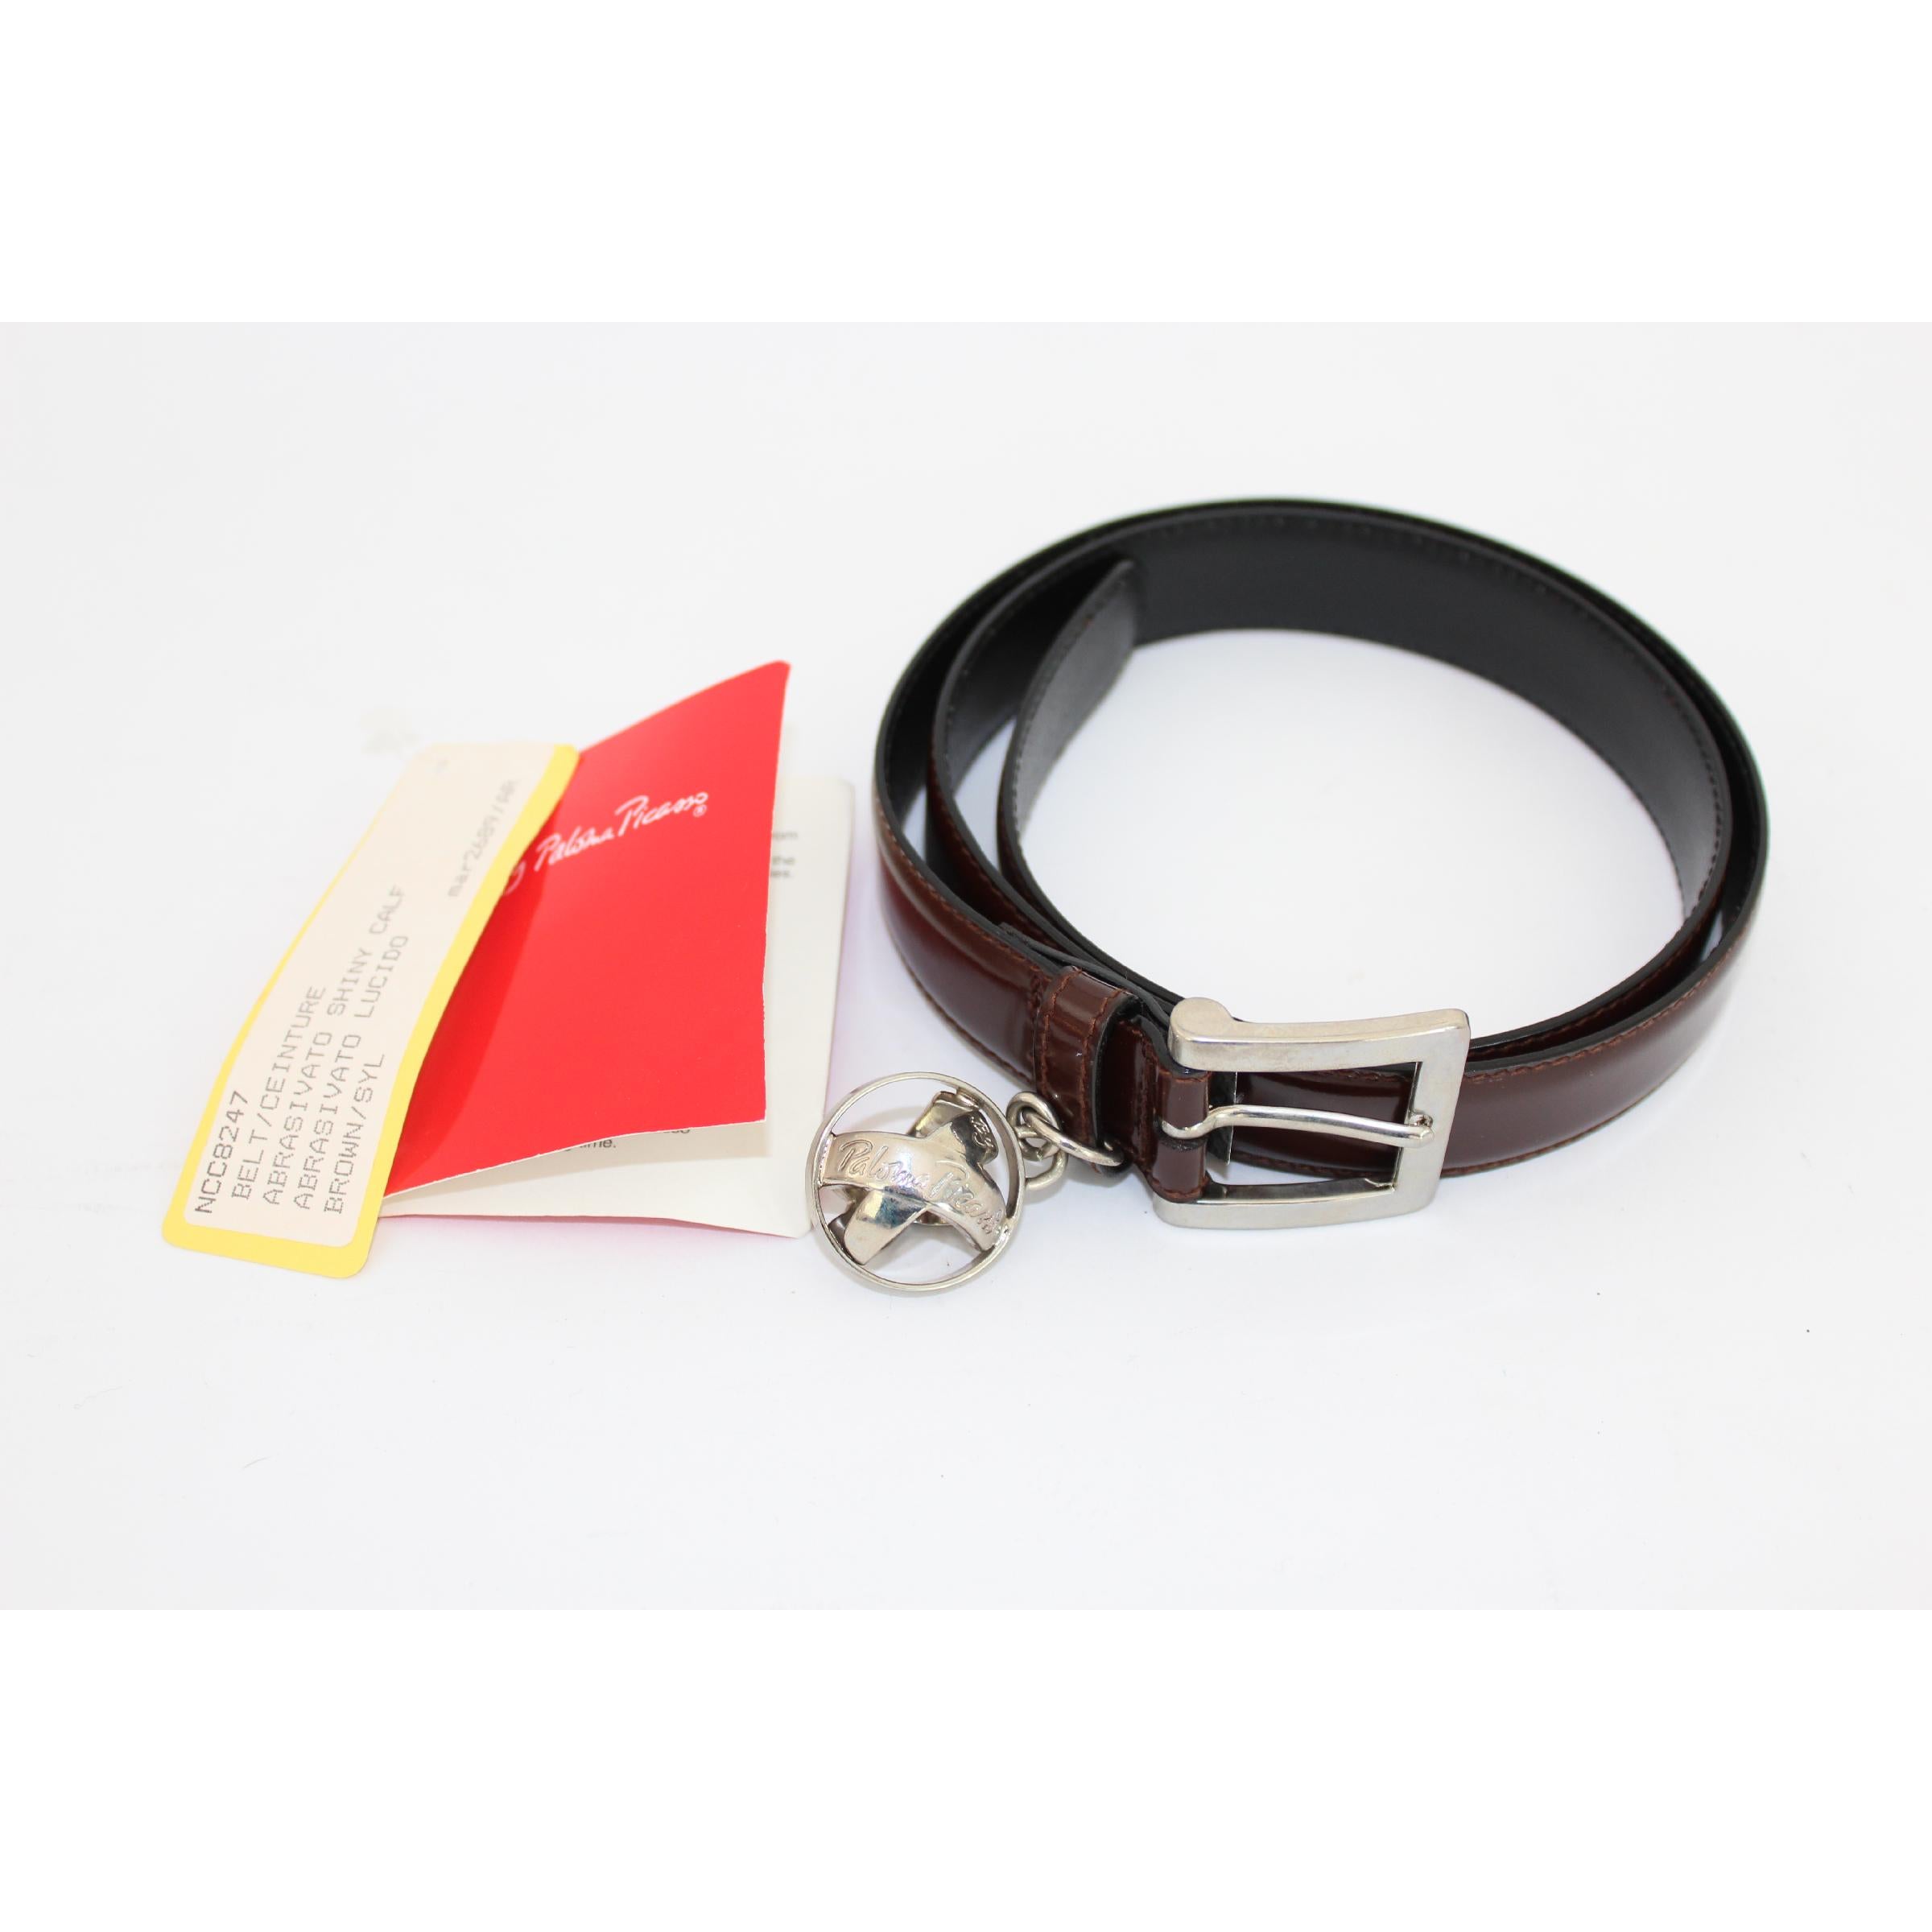 Picasso Paloma vintage women's belt, Tiffany designer, brown, 100% shiny leather, buckle with silver pendant, three adjustable notches. 80s. Made in Italy. New with tag. Certificate No. BL 0863523

Size: 75 / MD It 28 Us 8 Uk

Length: 85 cm
Width: 2